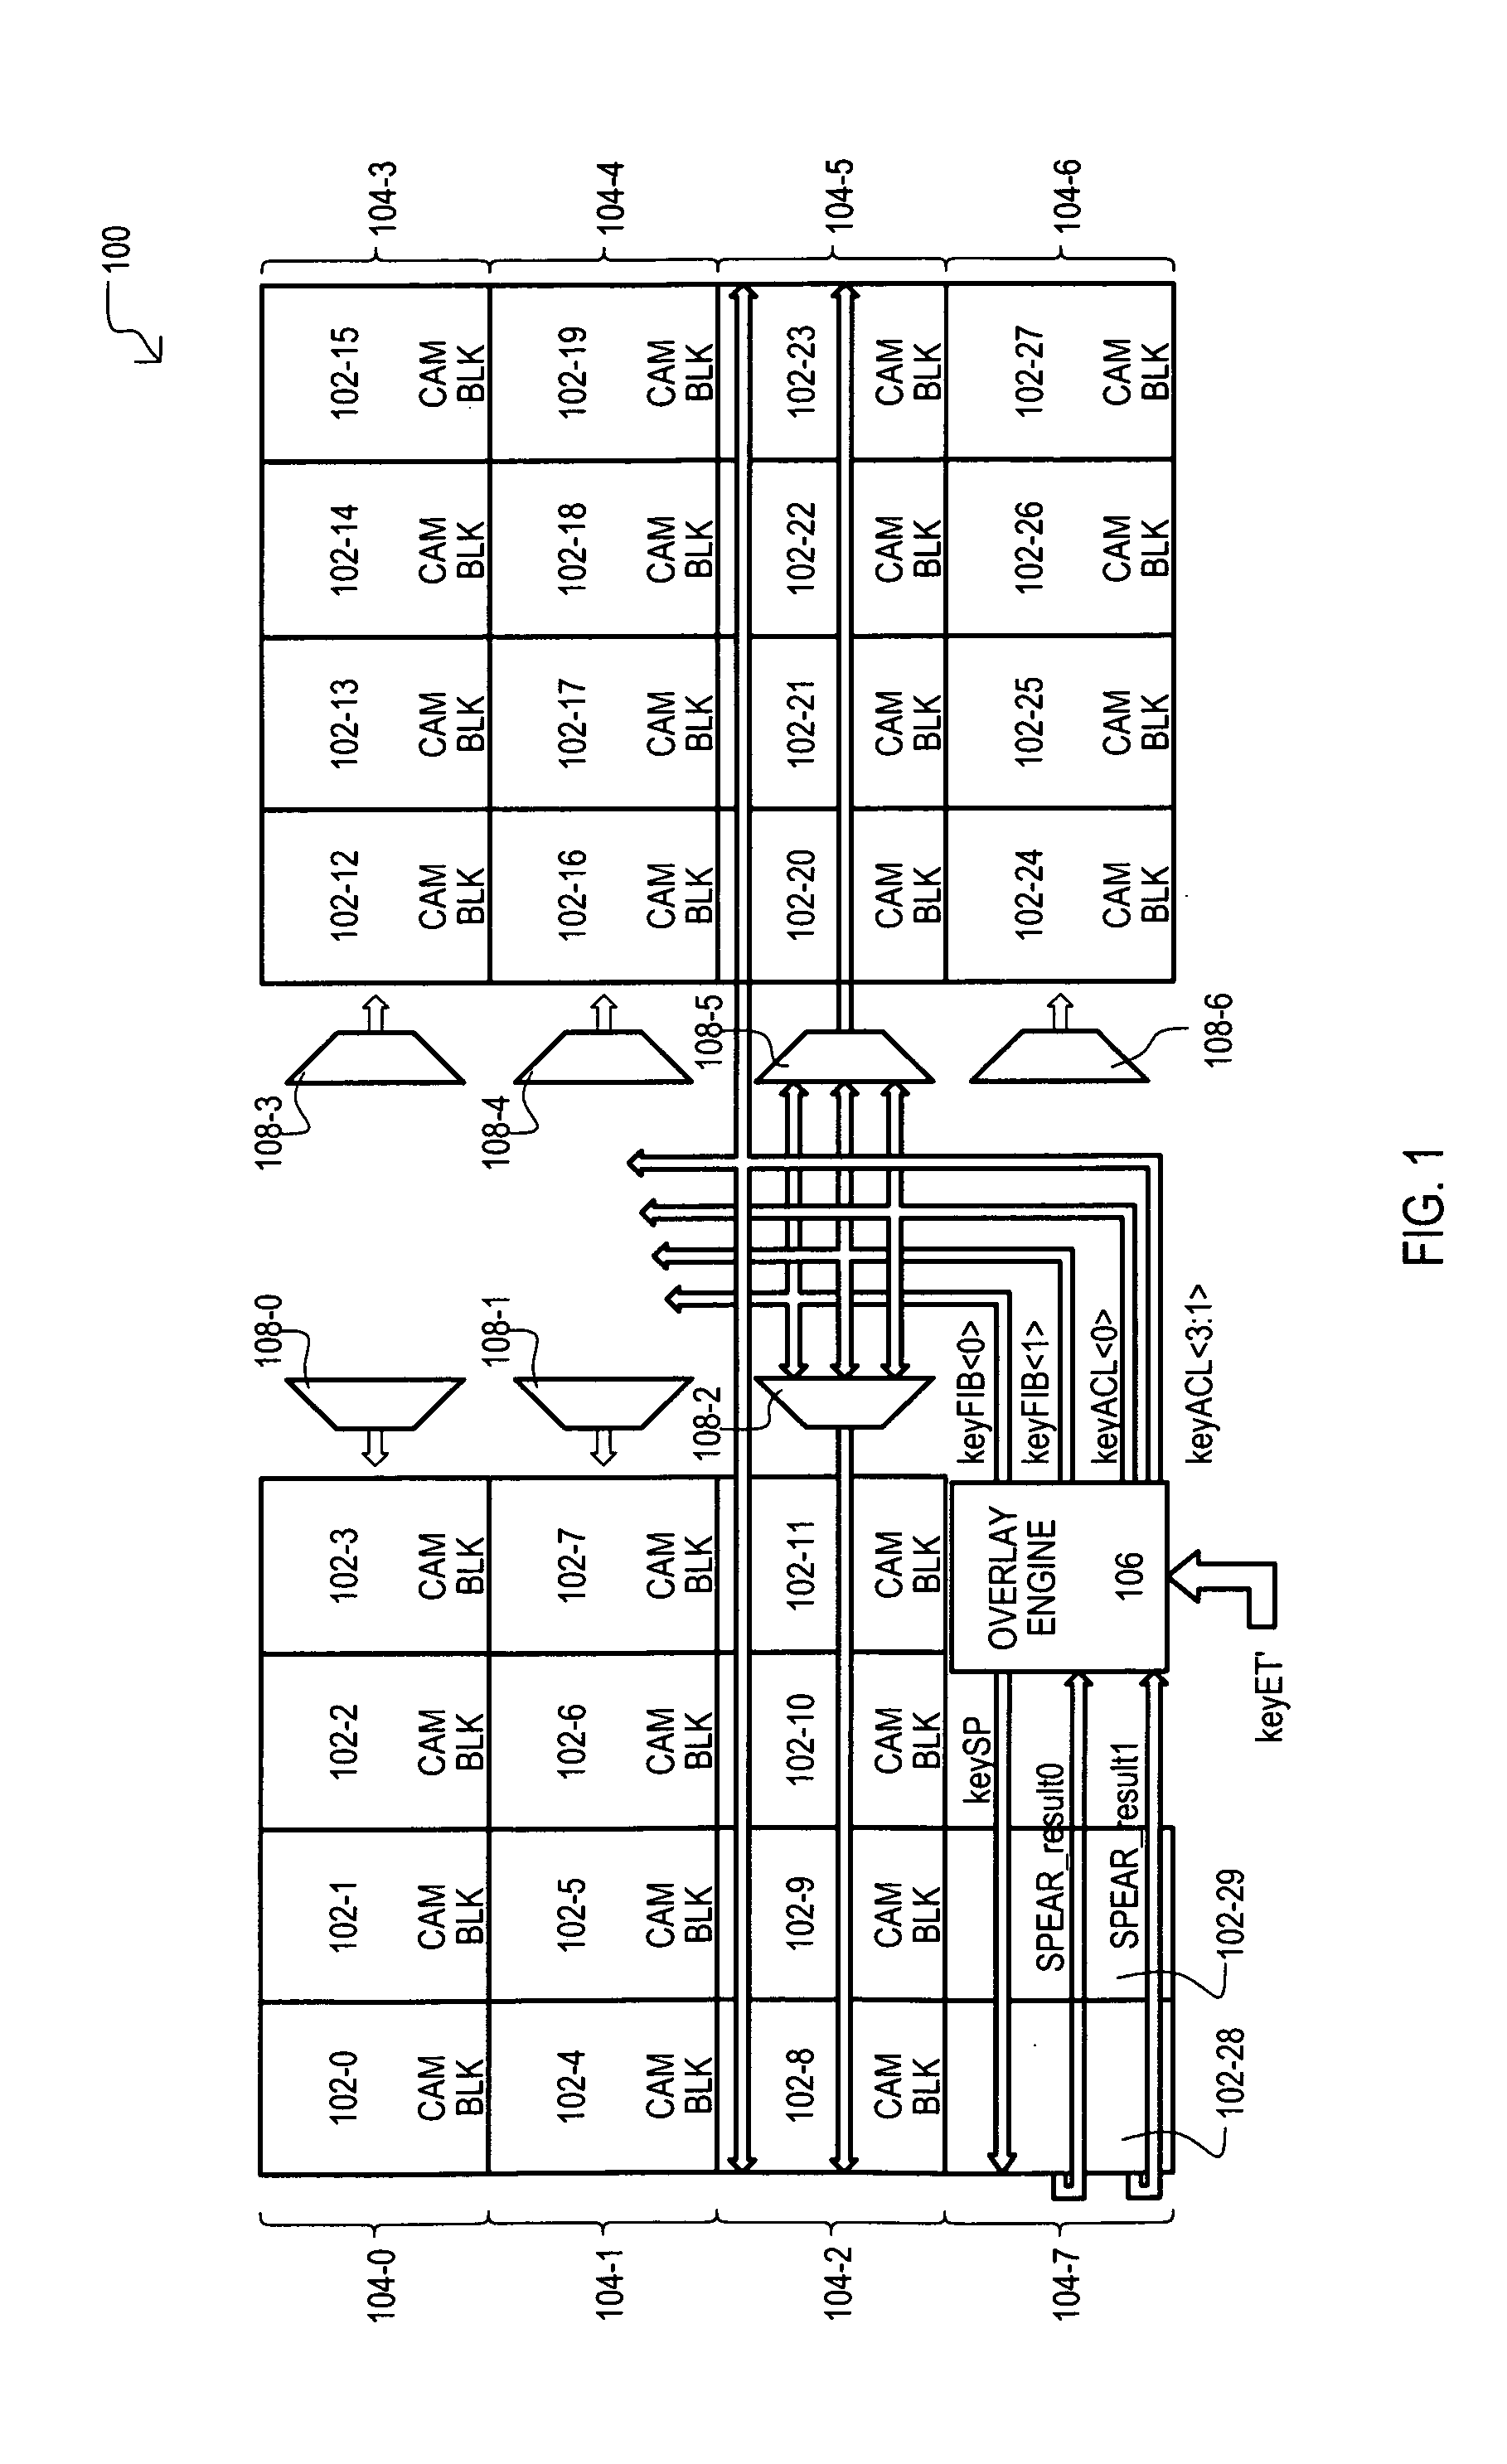 Method and apparatus for overlaying flat and/or tree based data sets onto content addressable memory (CAM) device